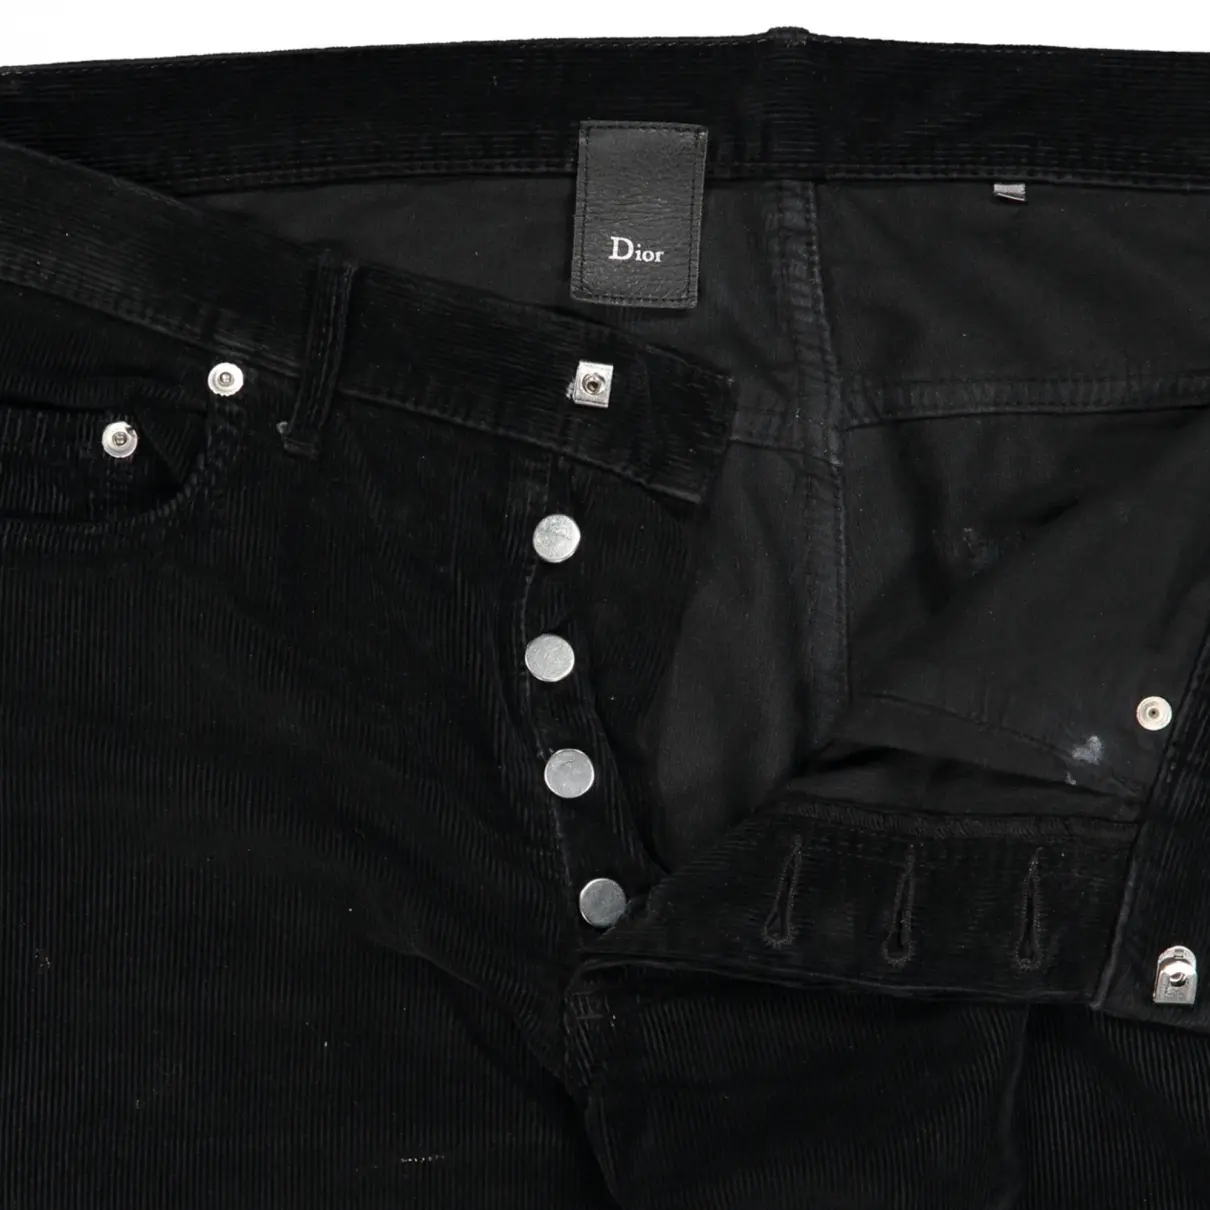 Buy Dior Trousers online